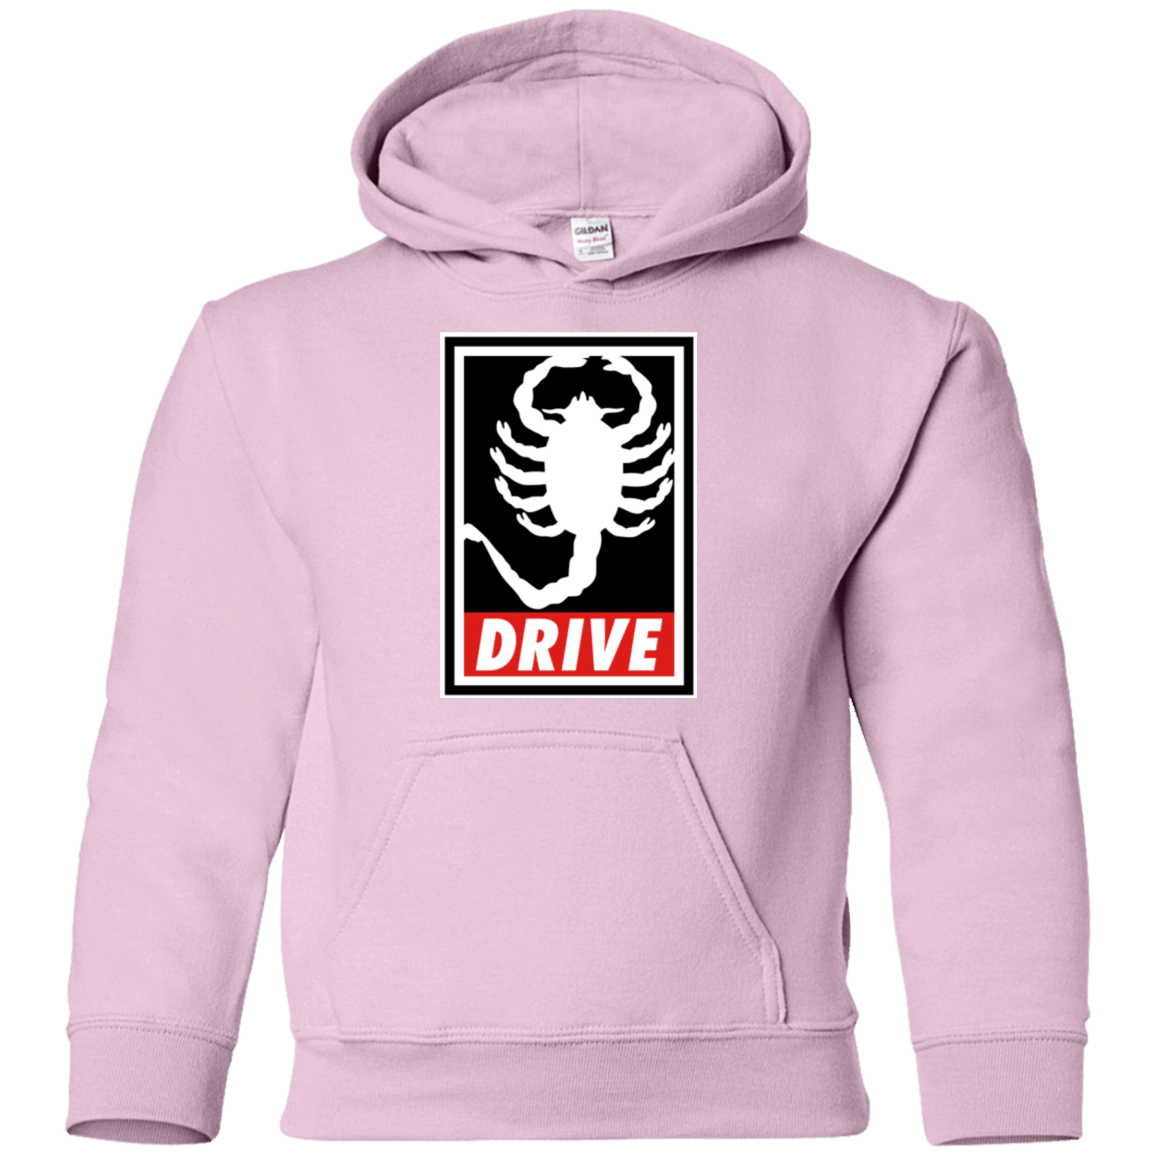 Sweatshirts Light Pink / YS Obey and drive Youth Hoodie